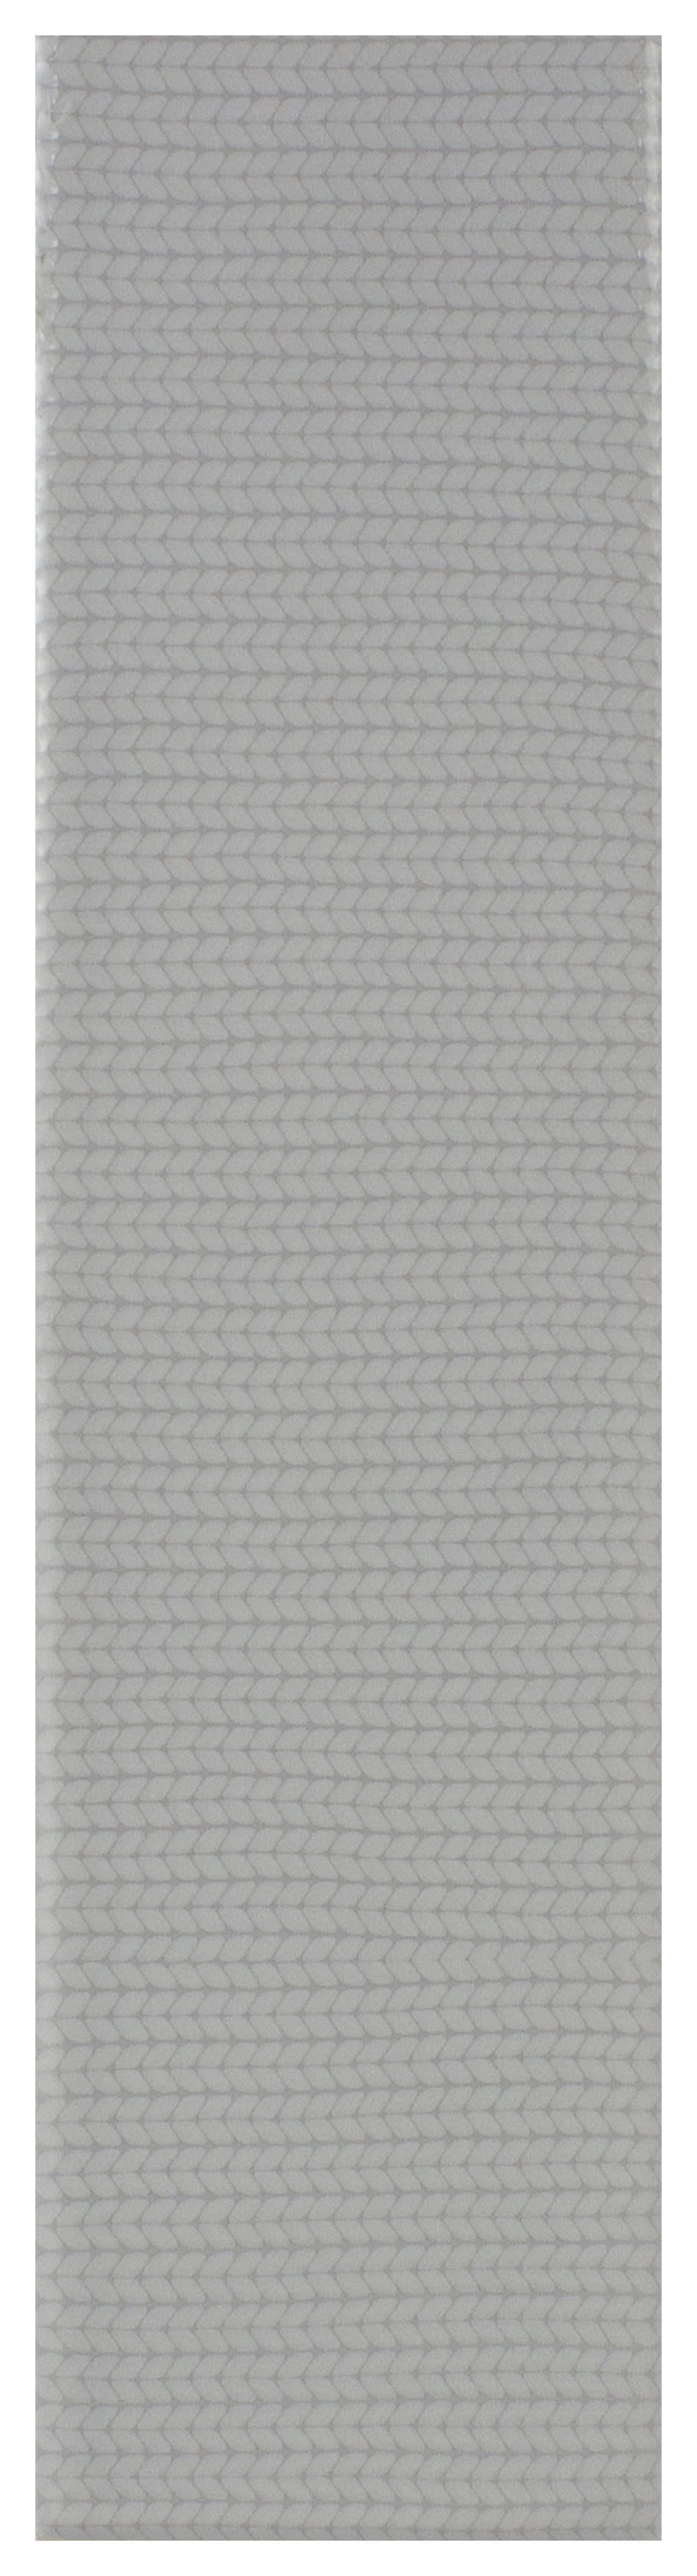 Wickes Boutique Flair Gradient Patterns Grey Ceramic Wall